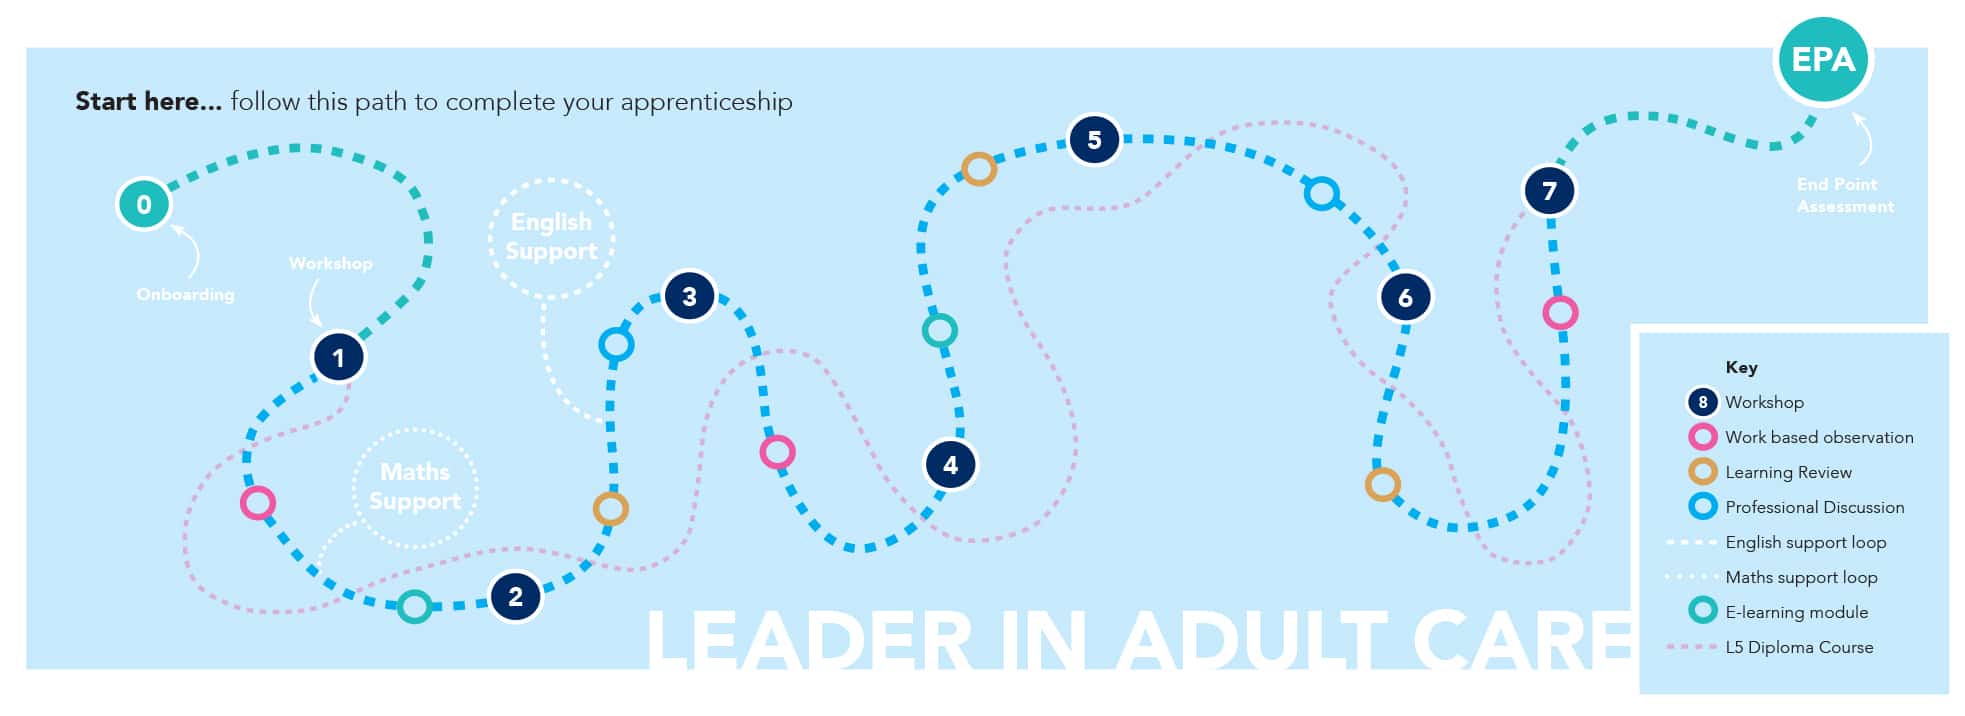 Leader in Adult Care Apprenticeship learning journey map